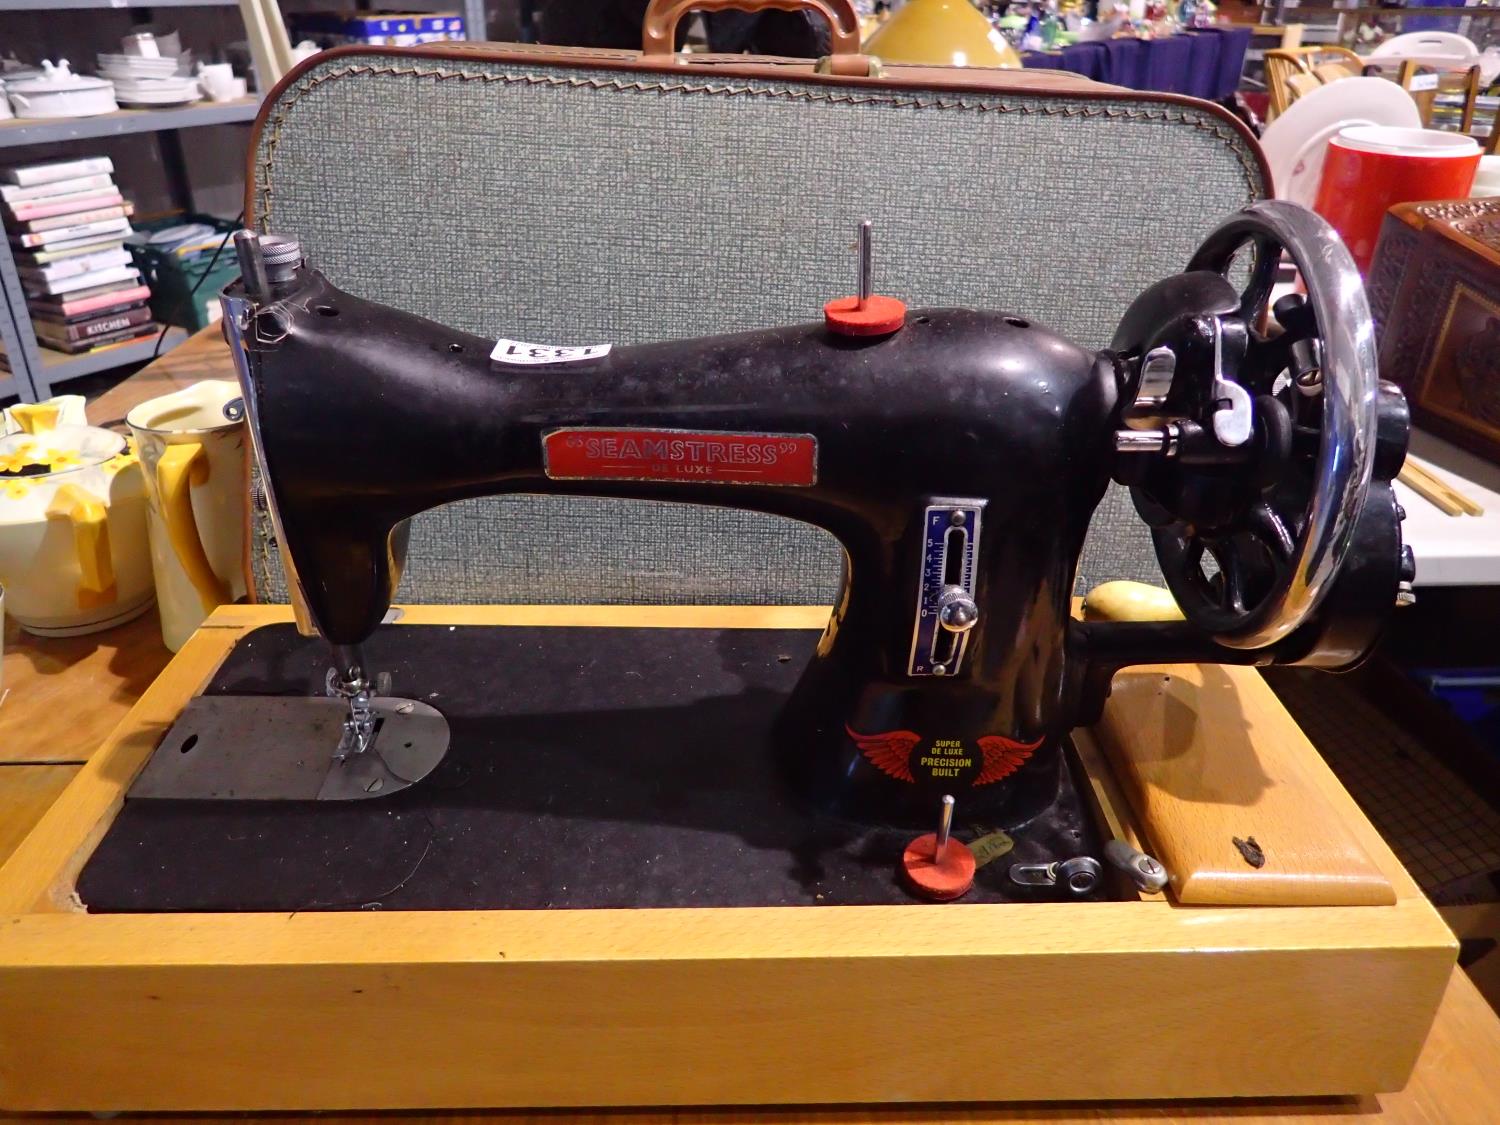 Seamstress Super Deluxe cased sewing machine. scuffs to body, hand crank is stiff but does rotate,